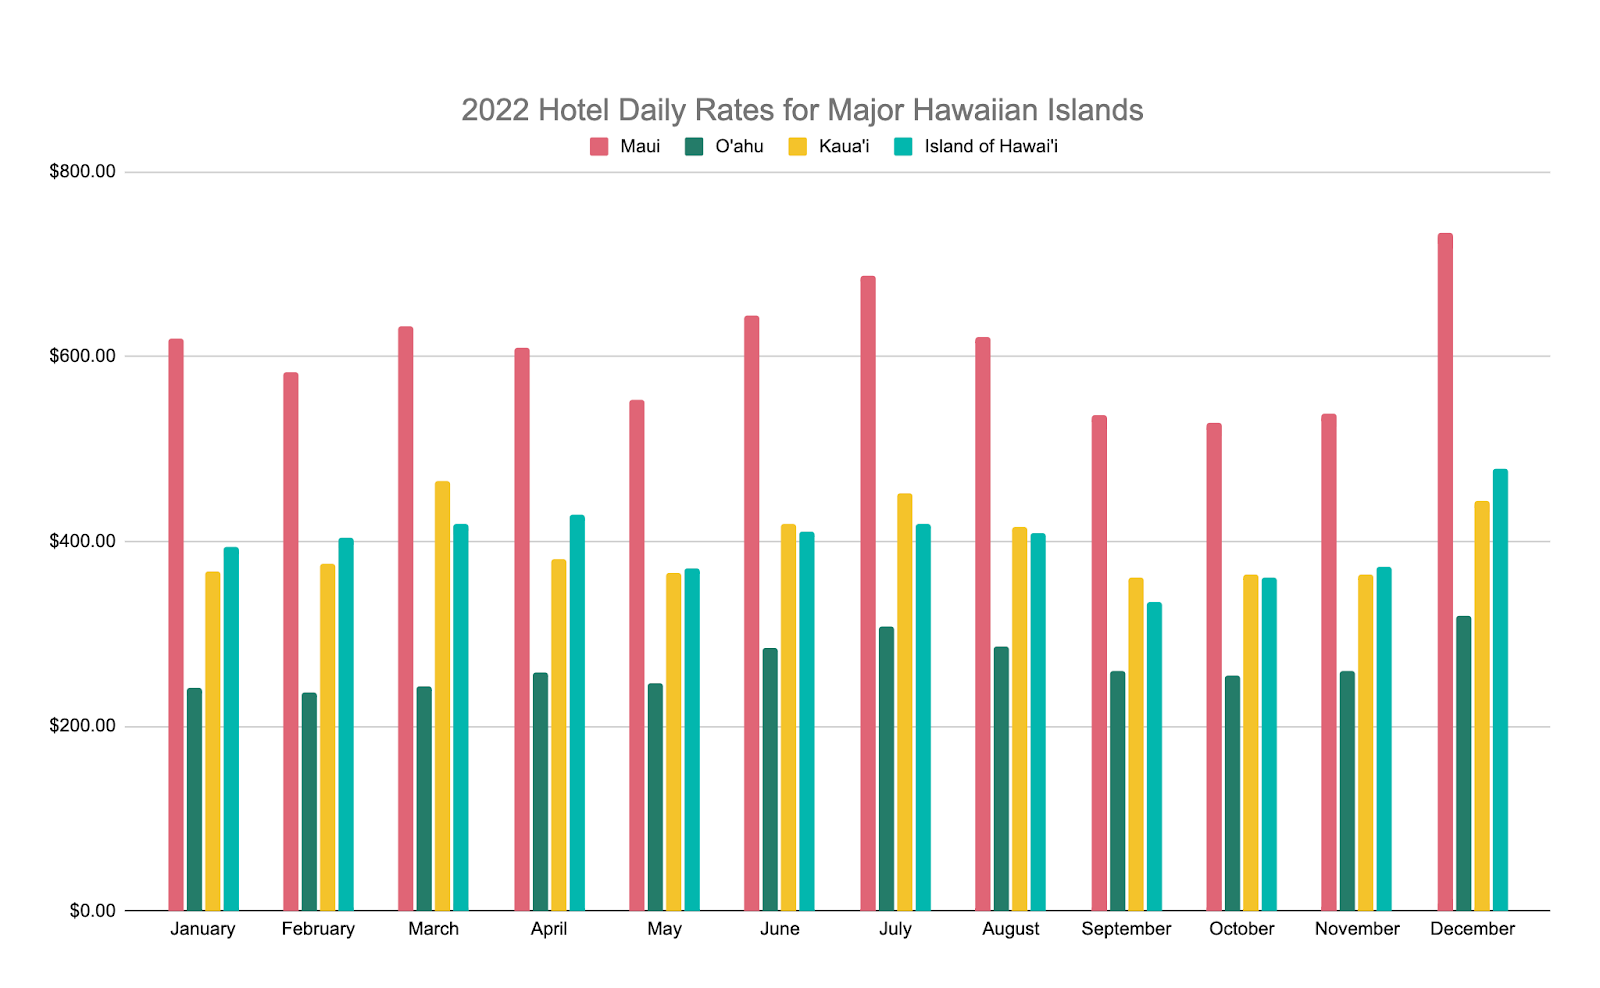 Hawaii in July - 2022 hotel daily rates